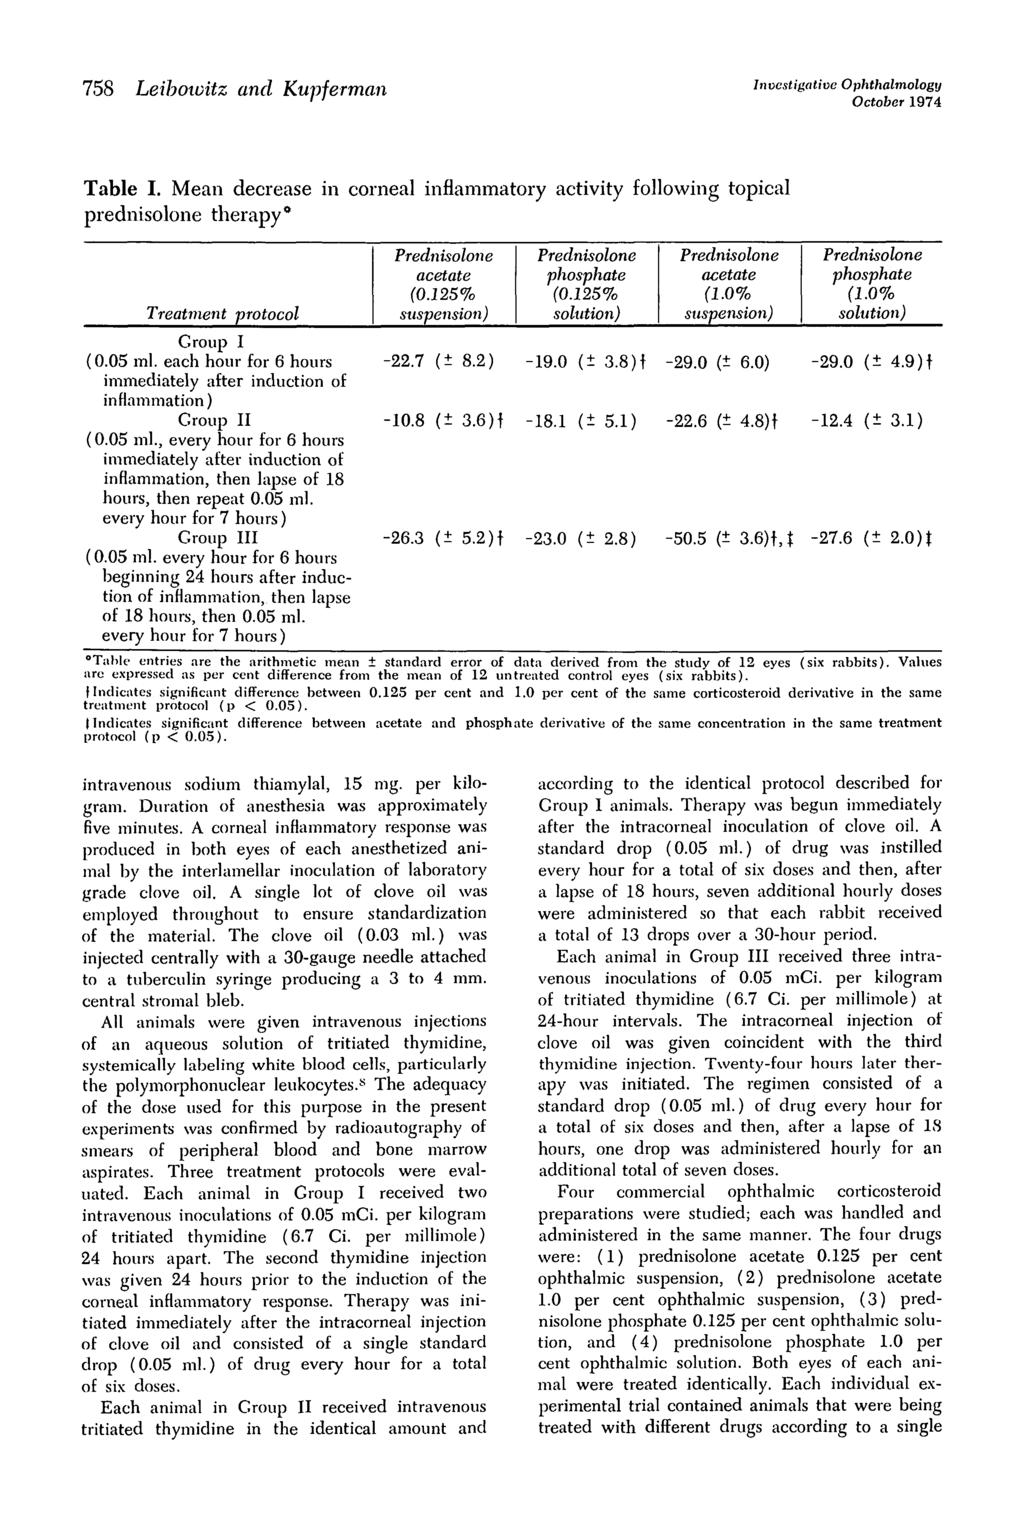 758 Leiboioitz and Kupferman Investigative Ophthalmology October 1974 Table I. Mean decrease in corneal inflammatory activity following topical prednisolone therapy* Treatment protocol acetate (0.